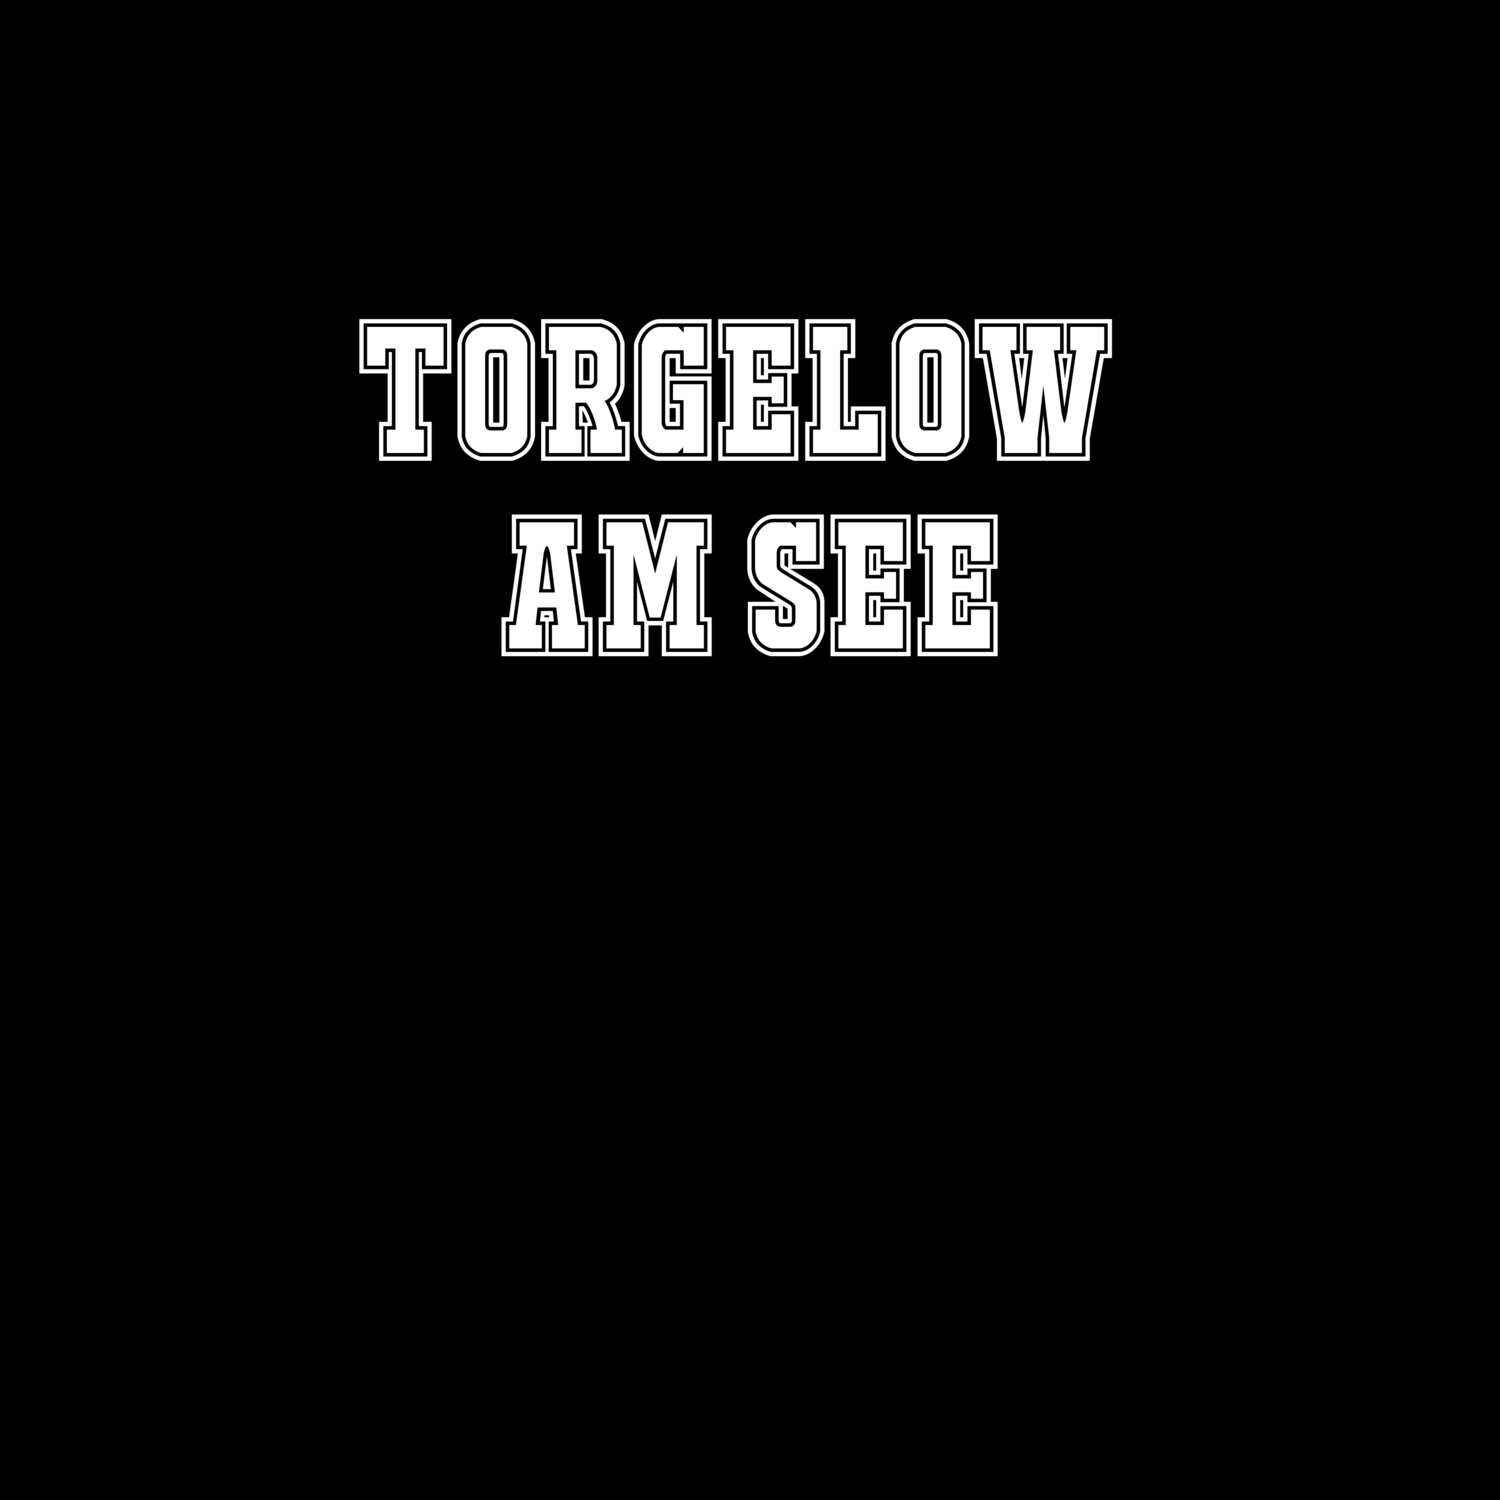 Torgelow am See T-Shirt »Classic«